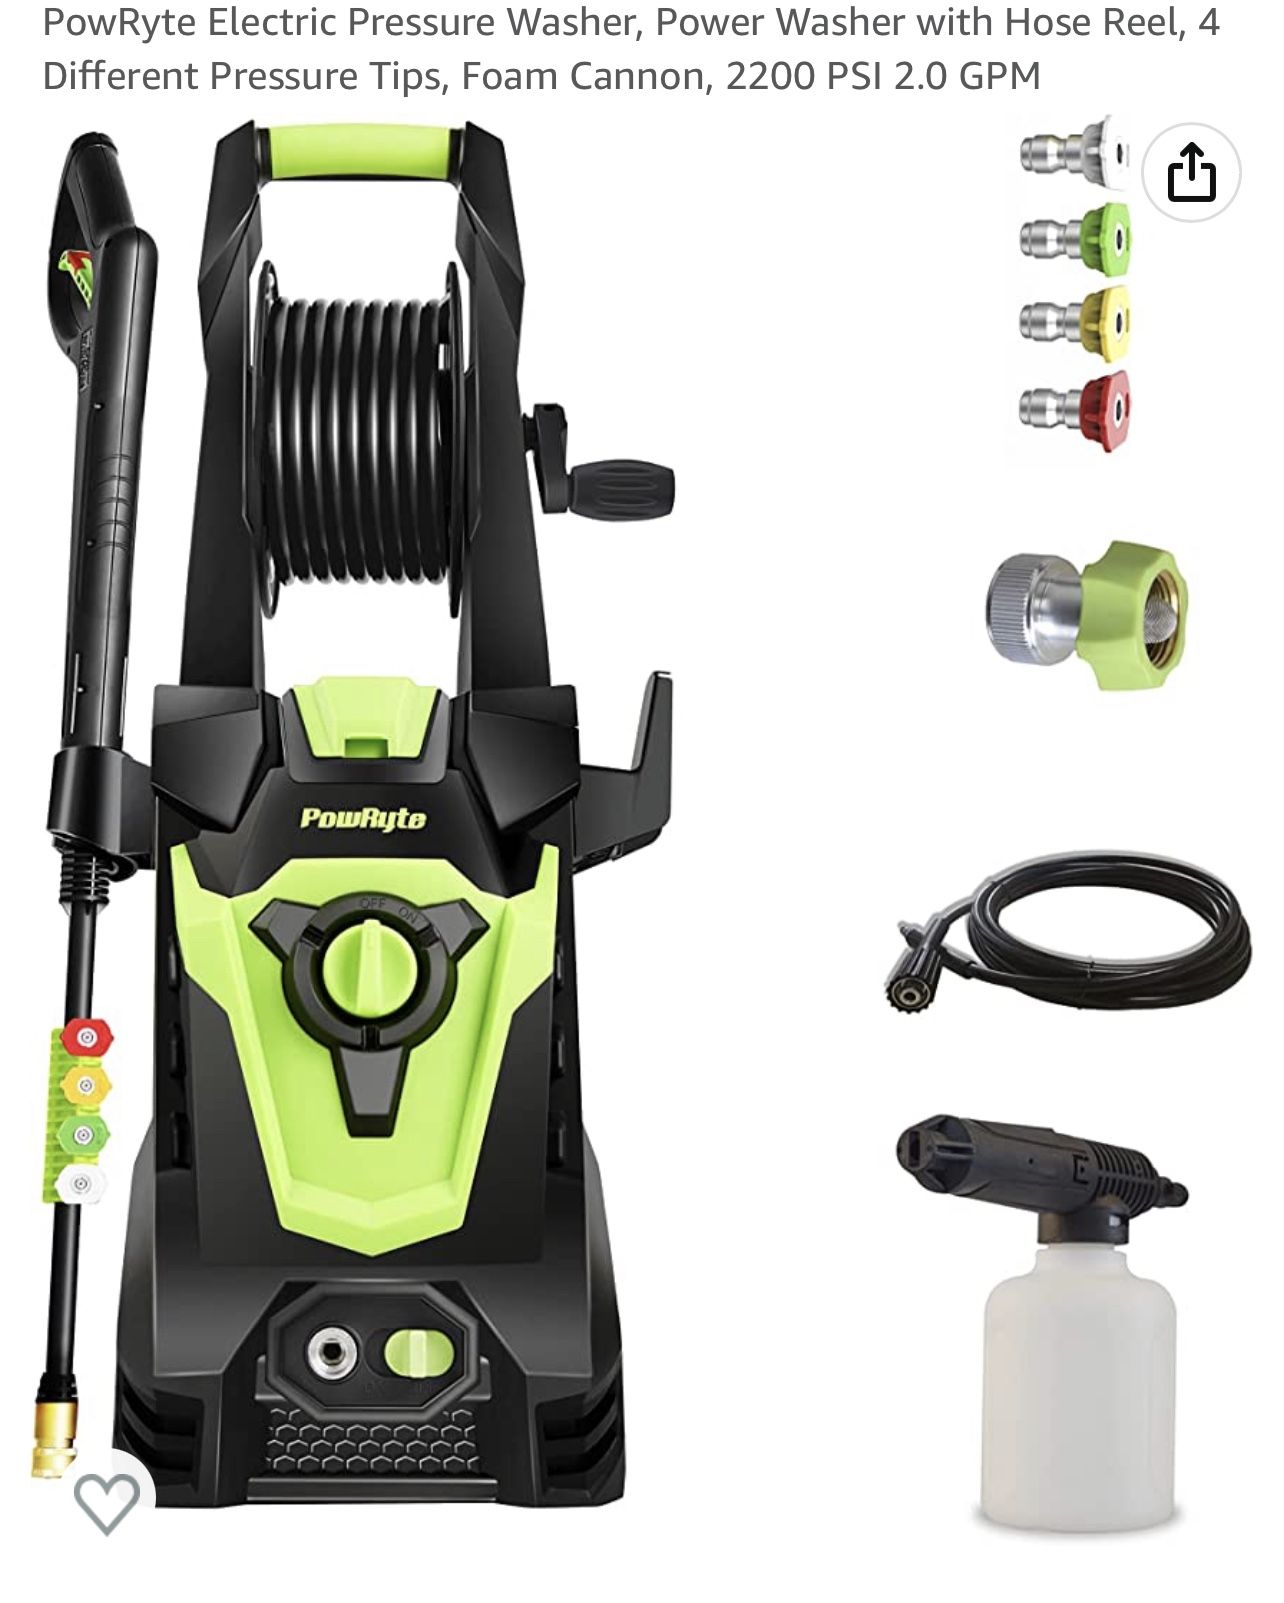 NIB 2000psi 2.0 GPM Electric Pressure Washer, Power Washer with Hose Reel Car Trucks 4 Different Pressure Tips, Foam Cannon